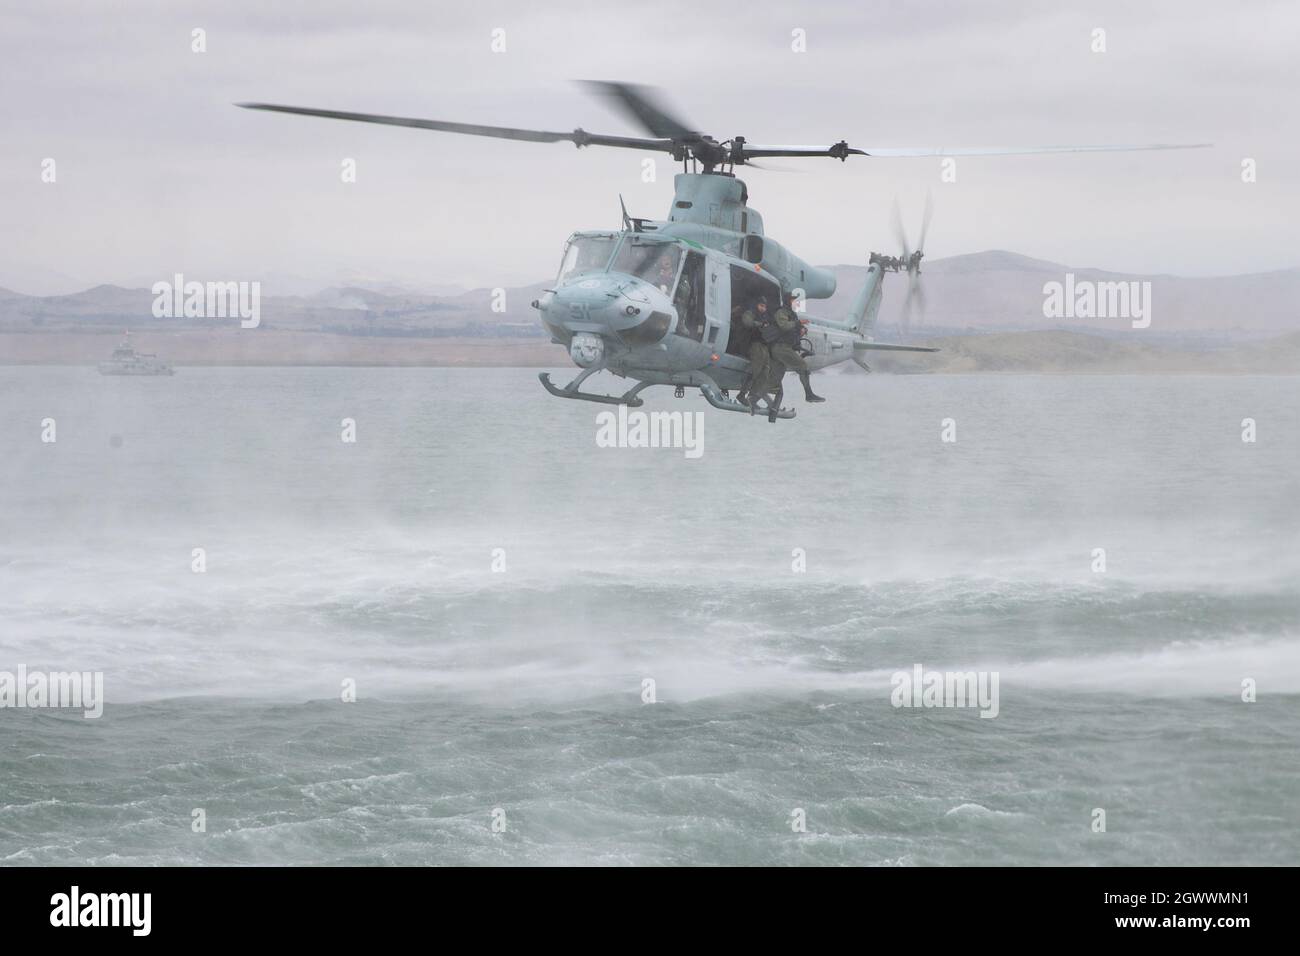 Members of the Fuerzas Armadas del Peru (Peruvian Armed Forces) helocast out of a UH-1Y Venom helicopter during an amphibious landing as part of UNITAS LXII in Salinas, Peru, Oct. 2, 2021. UNITAS is the world's longest-running maritime exercise. Hosted this year by Peru, it brings together multinational forces from twenty countries and includes 29 ships, four submarines, and twenty aircraft conducting operations off the coast of Lima and in the jungles of Iquitos. The exercise trains forces to conduct joint maritime operations and focuses on strengthening partnerships and increasing interopera Stock Photo